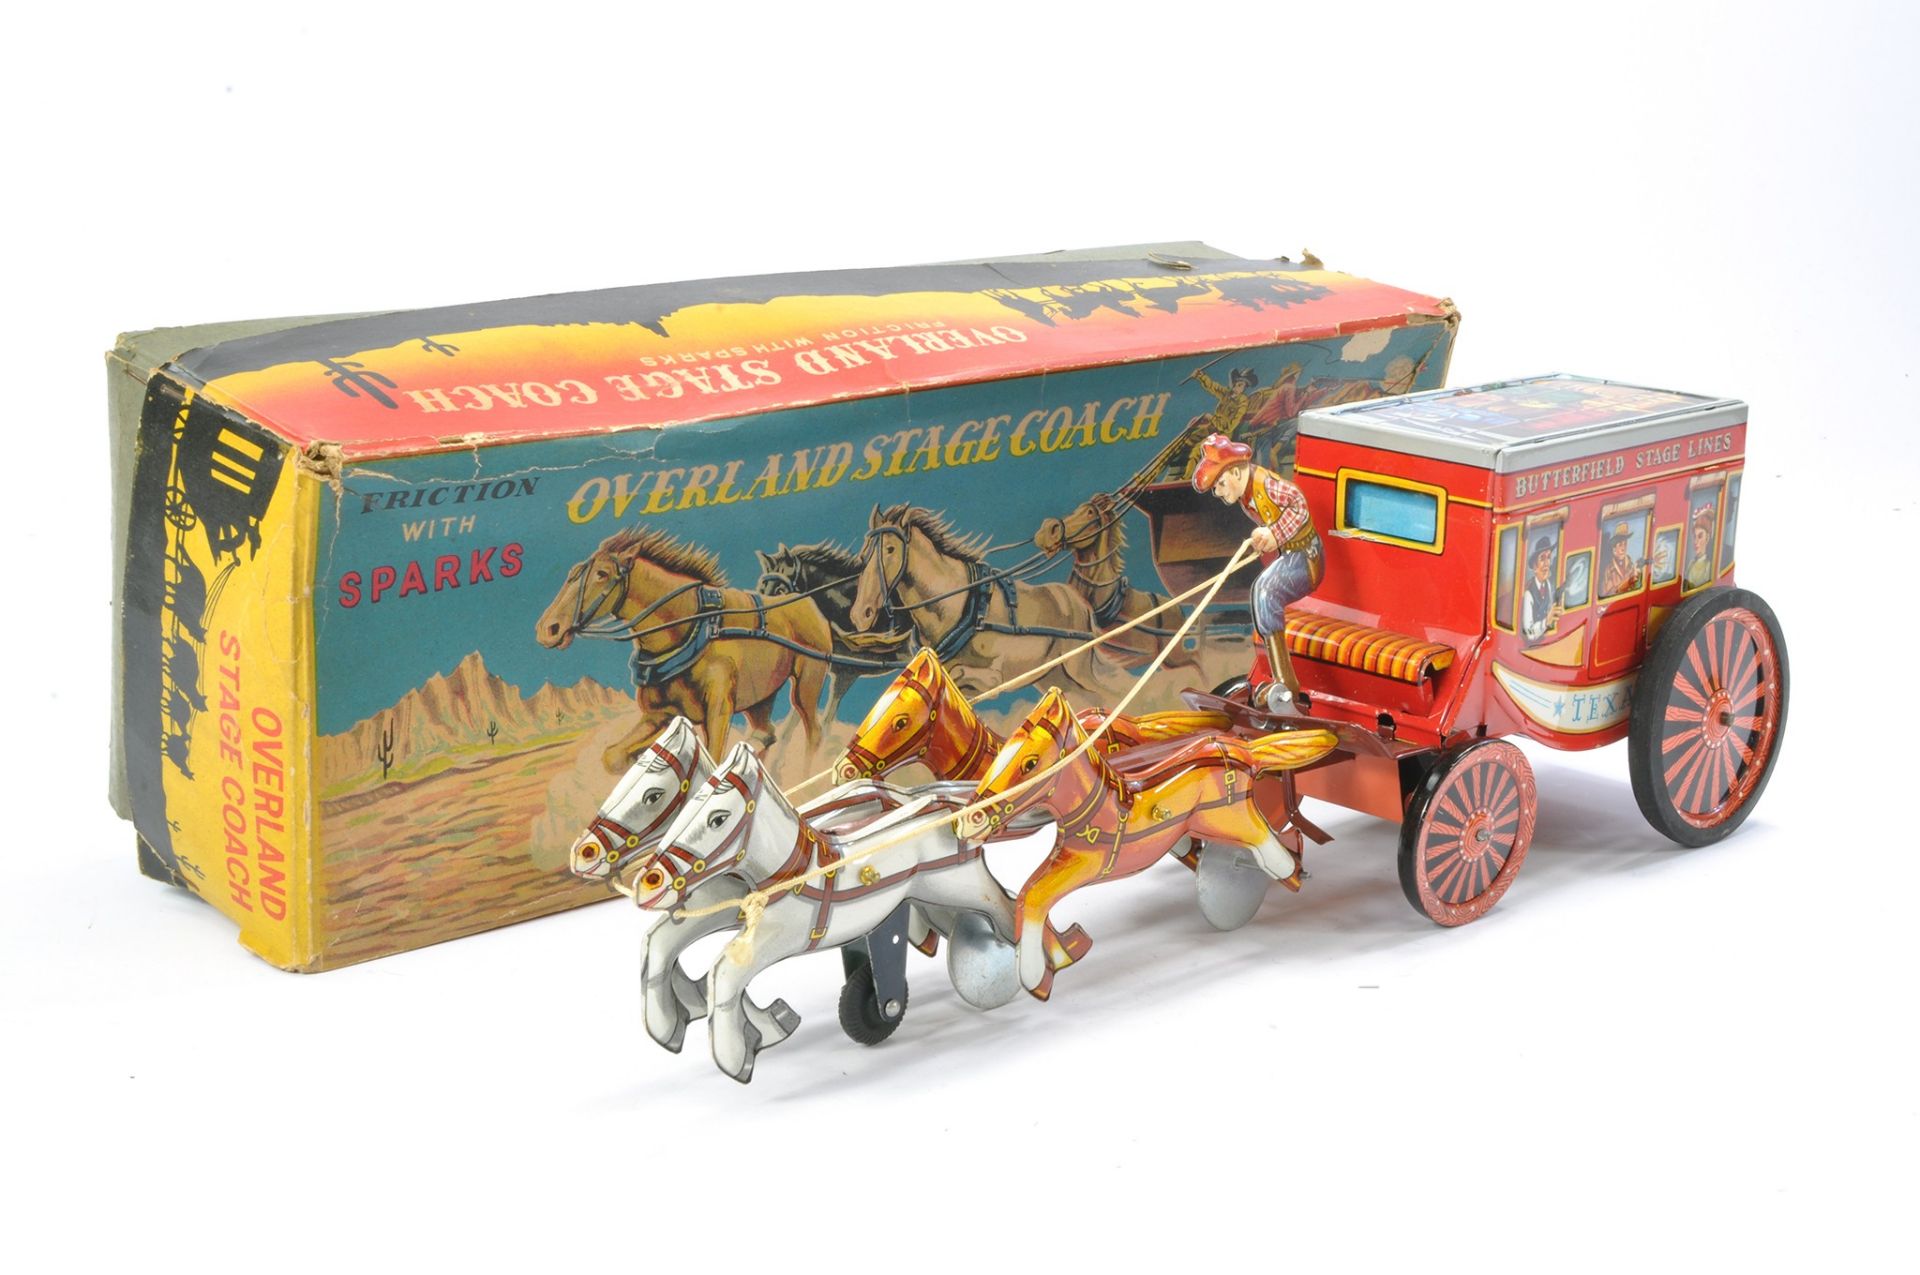 ALPS Friction Driven Tinplate Overland Stagecoach with Sparks. Generally excellent although motor